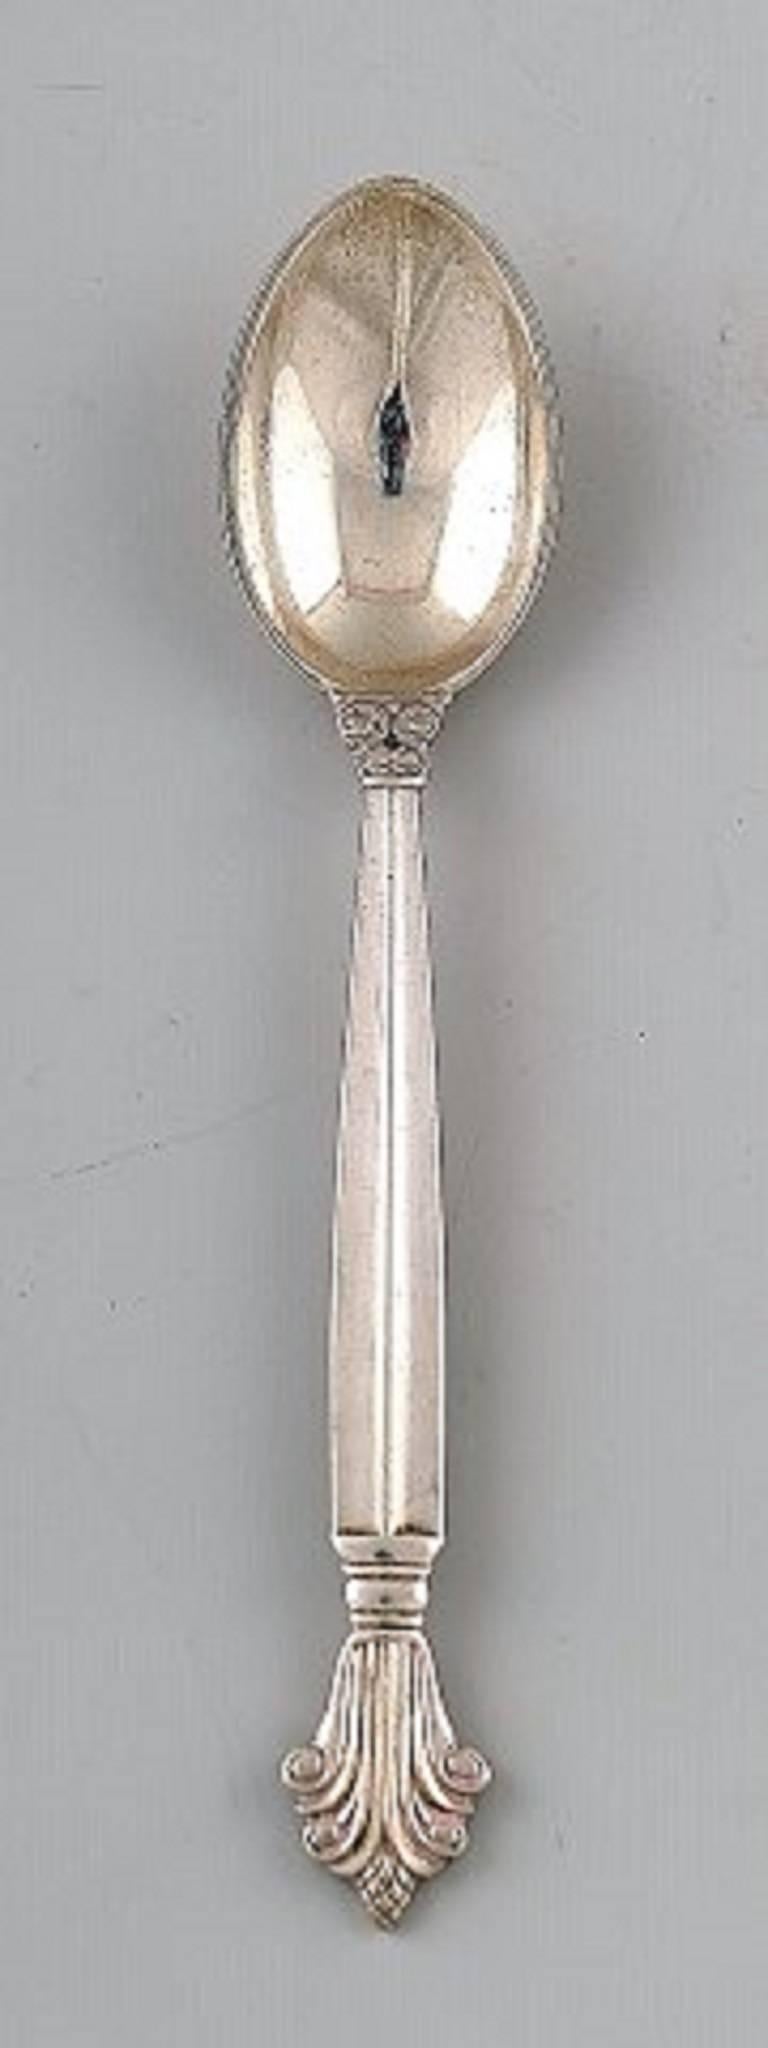 Georg Jensen silverware, Georg Jensen pattern Acanthus.

Designed by Johan Rohde.

Four mocha spoons.

Length 9.5 cm.

In excellent condition.

Early stamp.